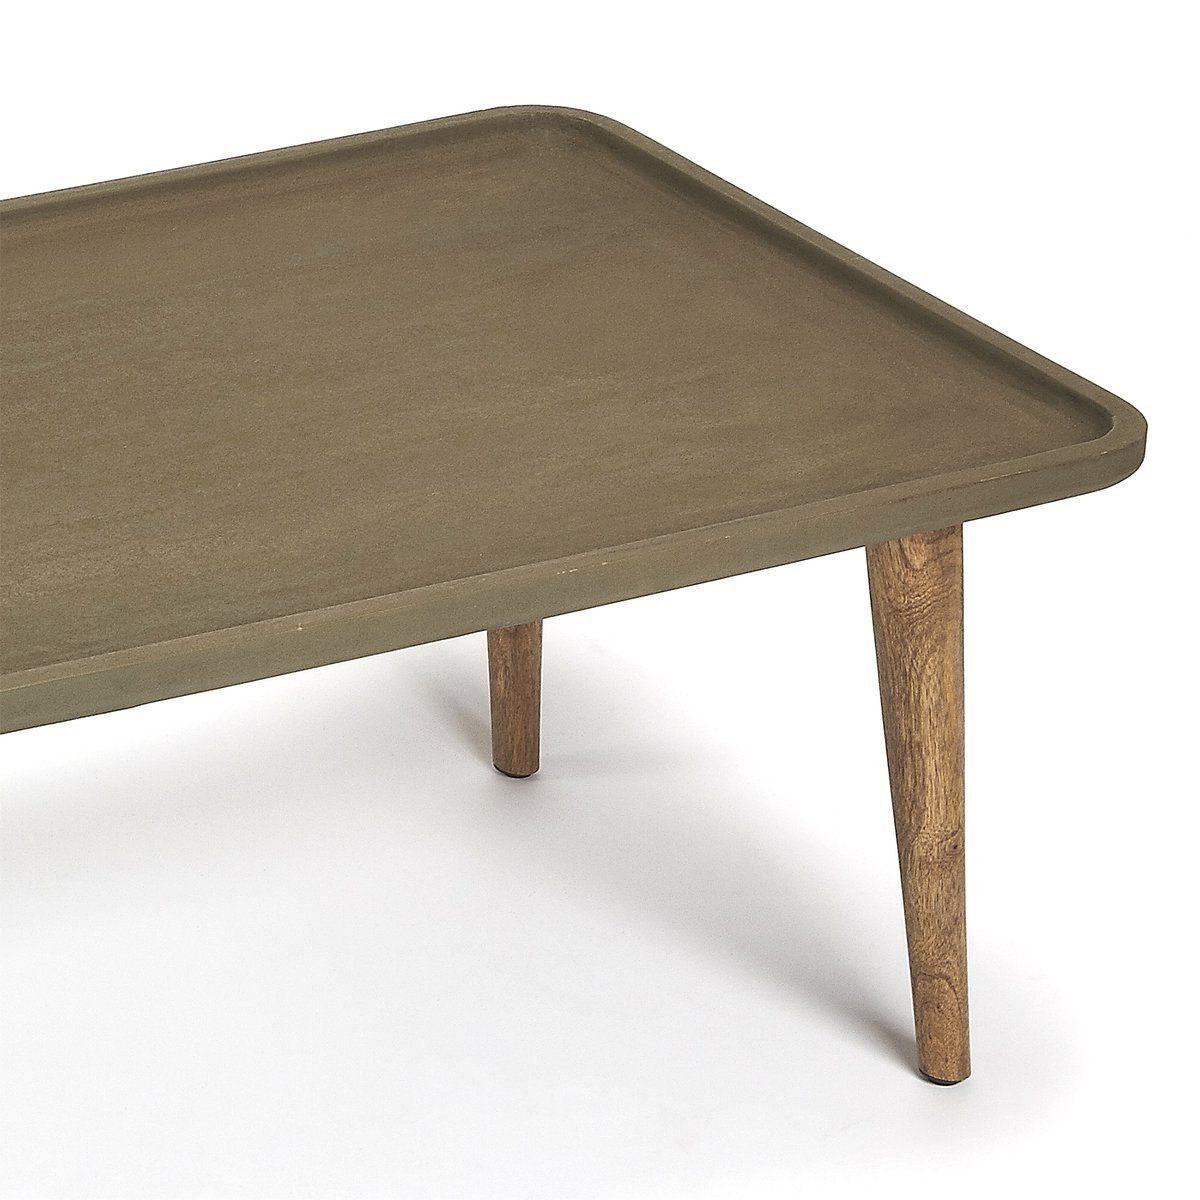 Concrete And Wood Industrial Modern Coffee Table – Woodwaves In Best And Newest Modern Concrete Coffee Tables (View 8 of 10)